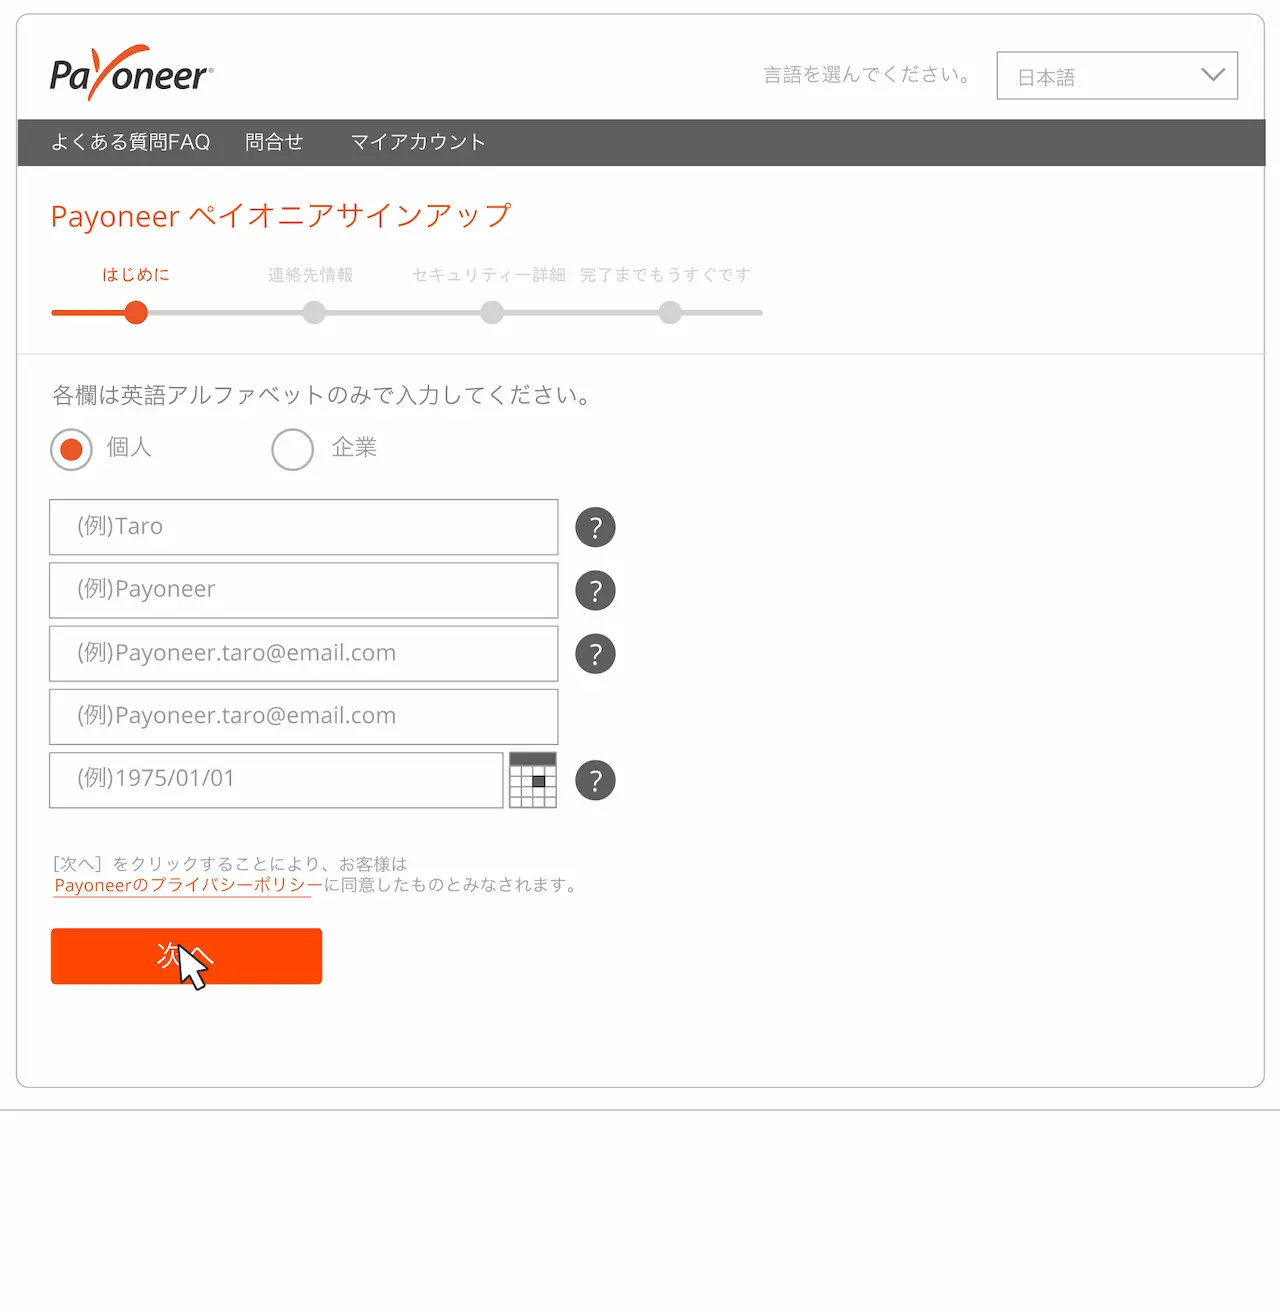 HowTo-Register-Payoneer-Account_01